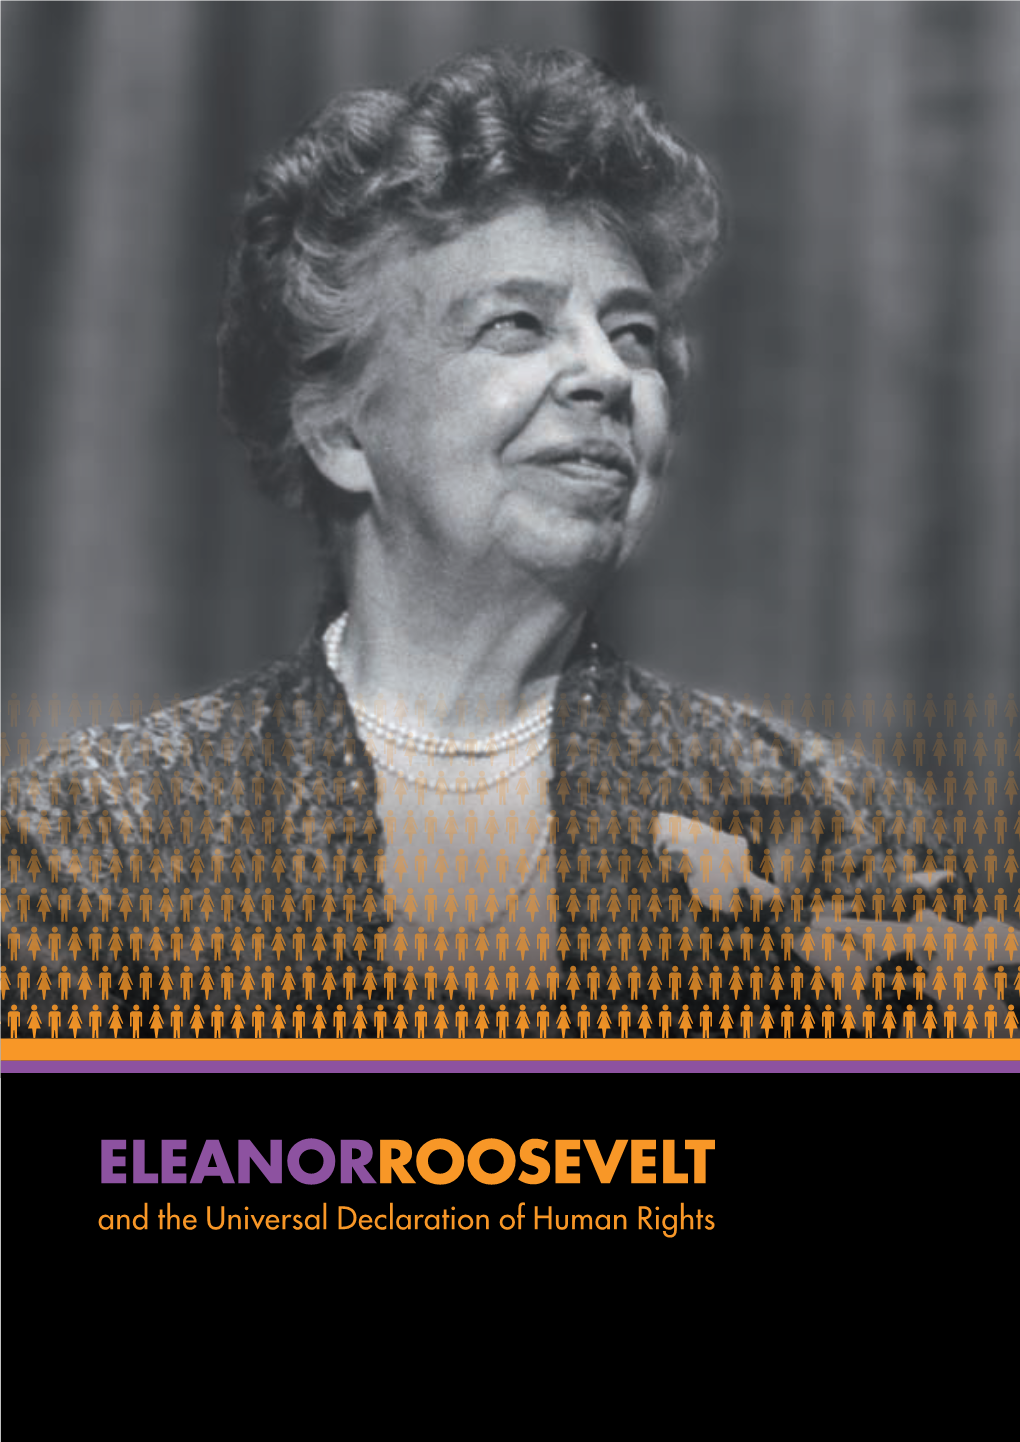 ELEANORROOSEVELT and the Universal Declaration of Human Rights the TASK FORCE “CELEBRATING ELEANOR ROOSEVELT – LEADER in HUMAN RIGHTS”